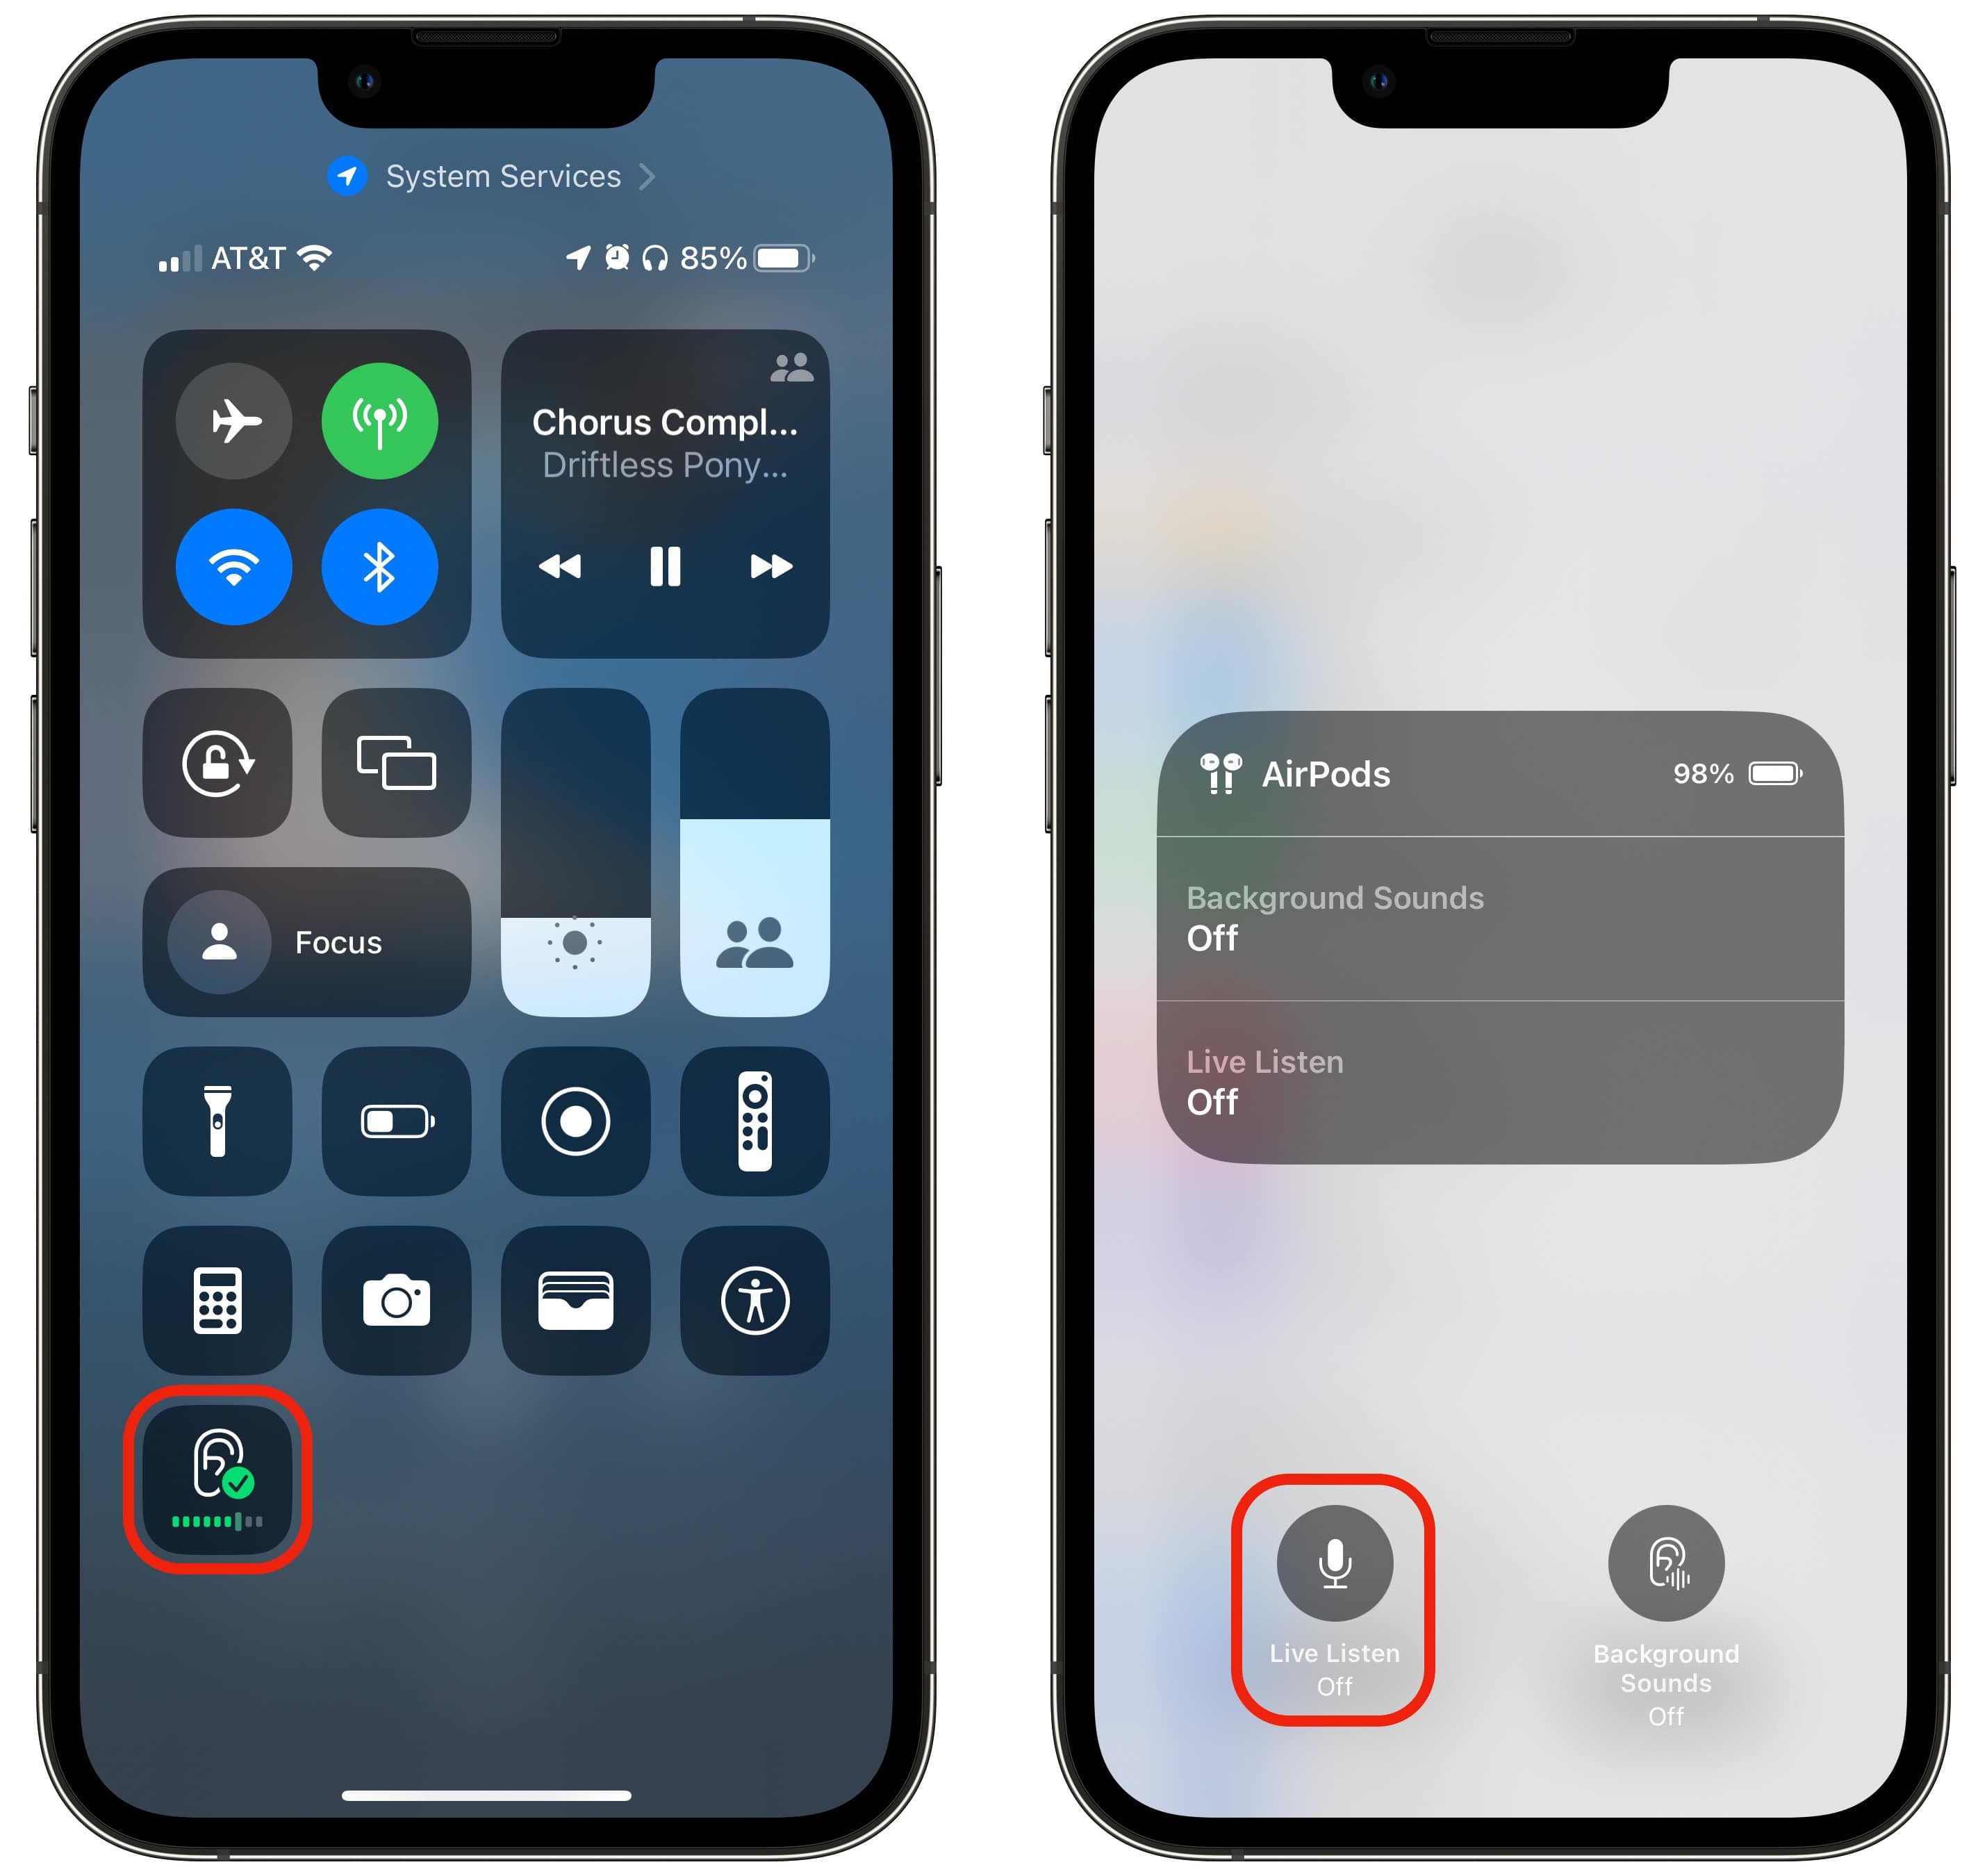 Turn on Live Listen in Control Center